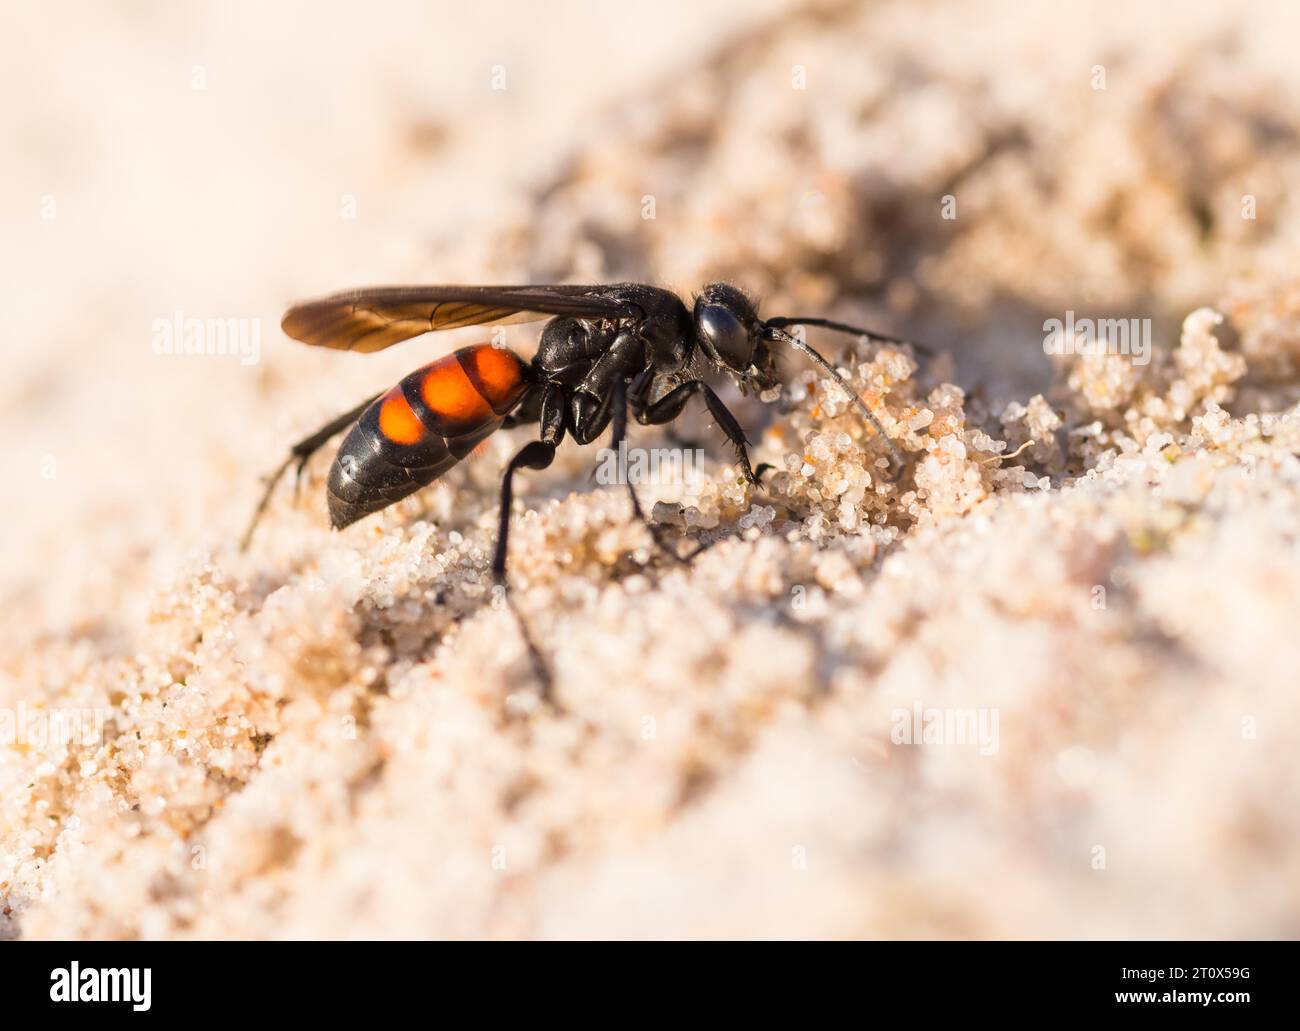 Black-banded spider wasp (Anoplius viaticus), female, sitting in the sun on sandy soil in front of her brood burrow or nest hole, Duenenheide nature Stock Photo